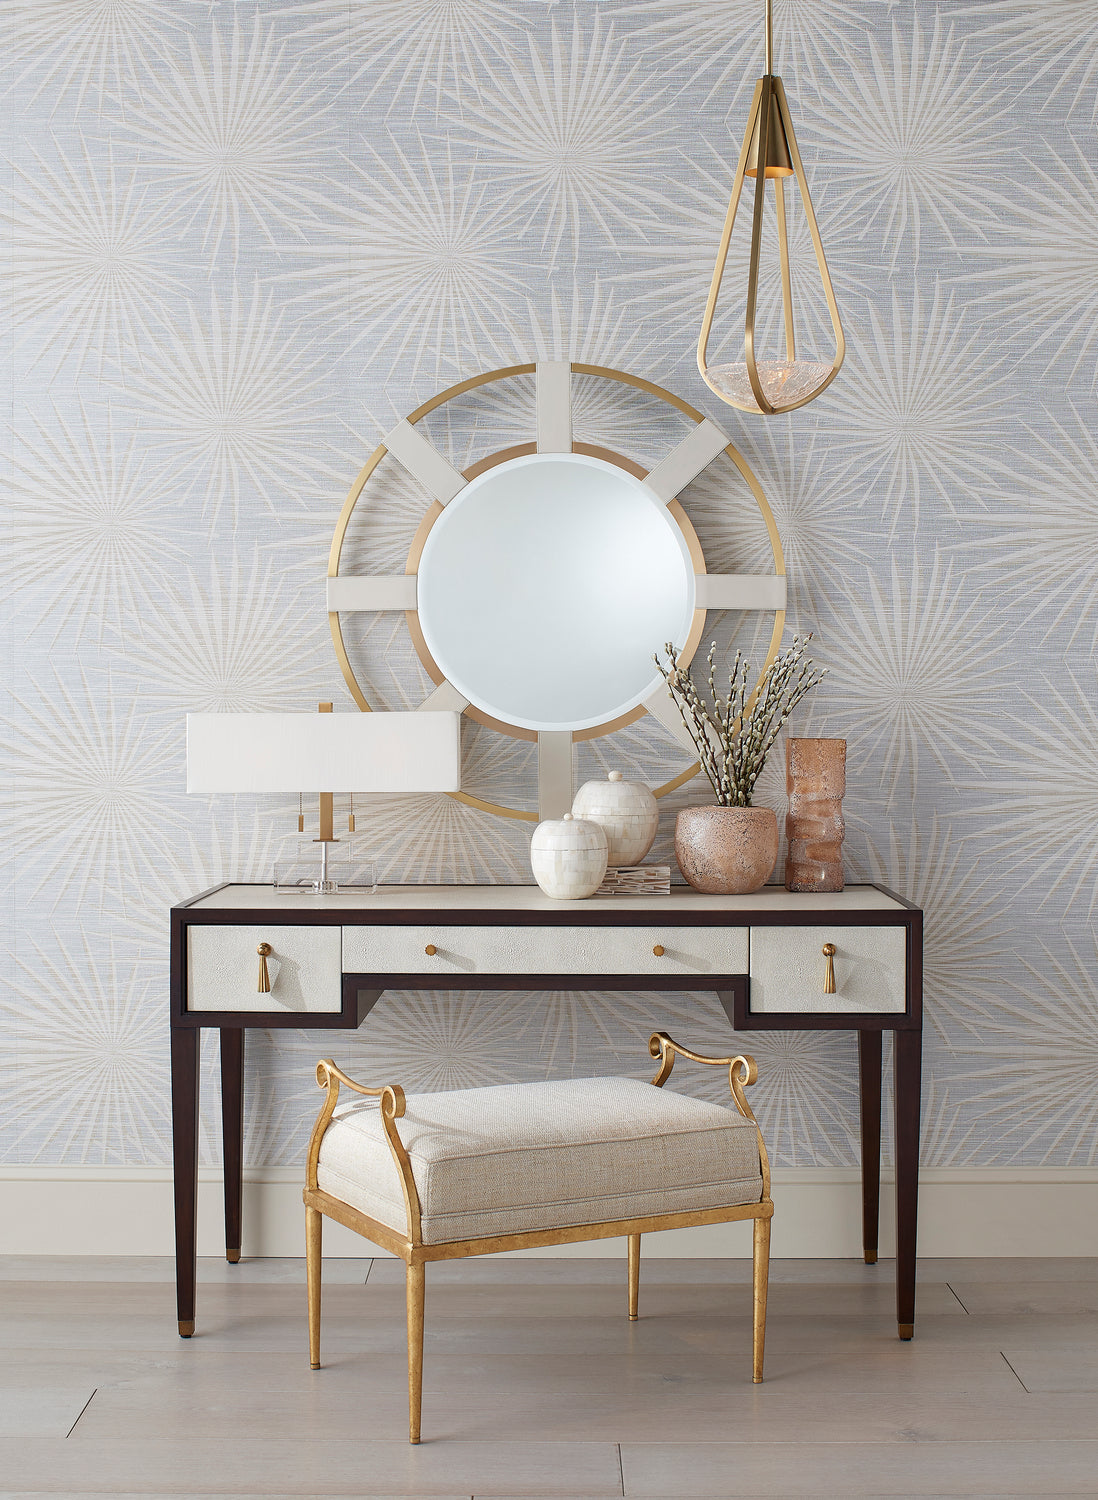 Mirror from the Camille collection in Cream/Brushed Brass/Mirror finish